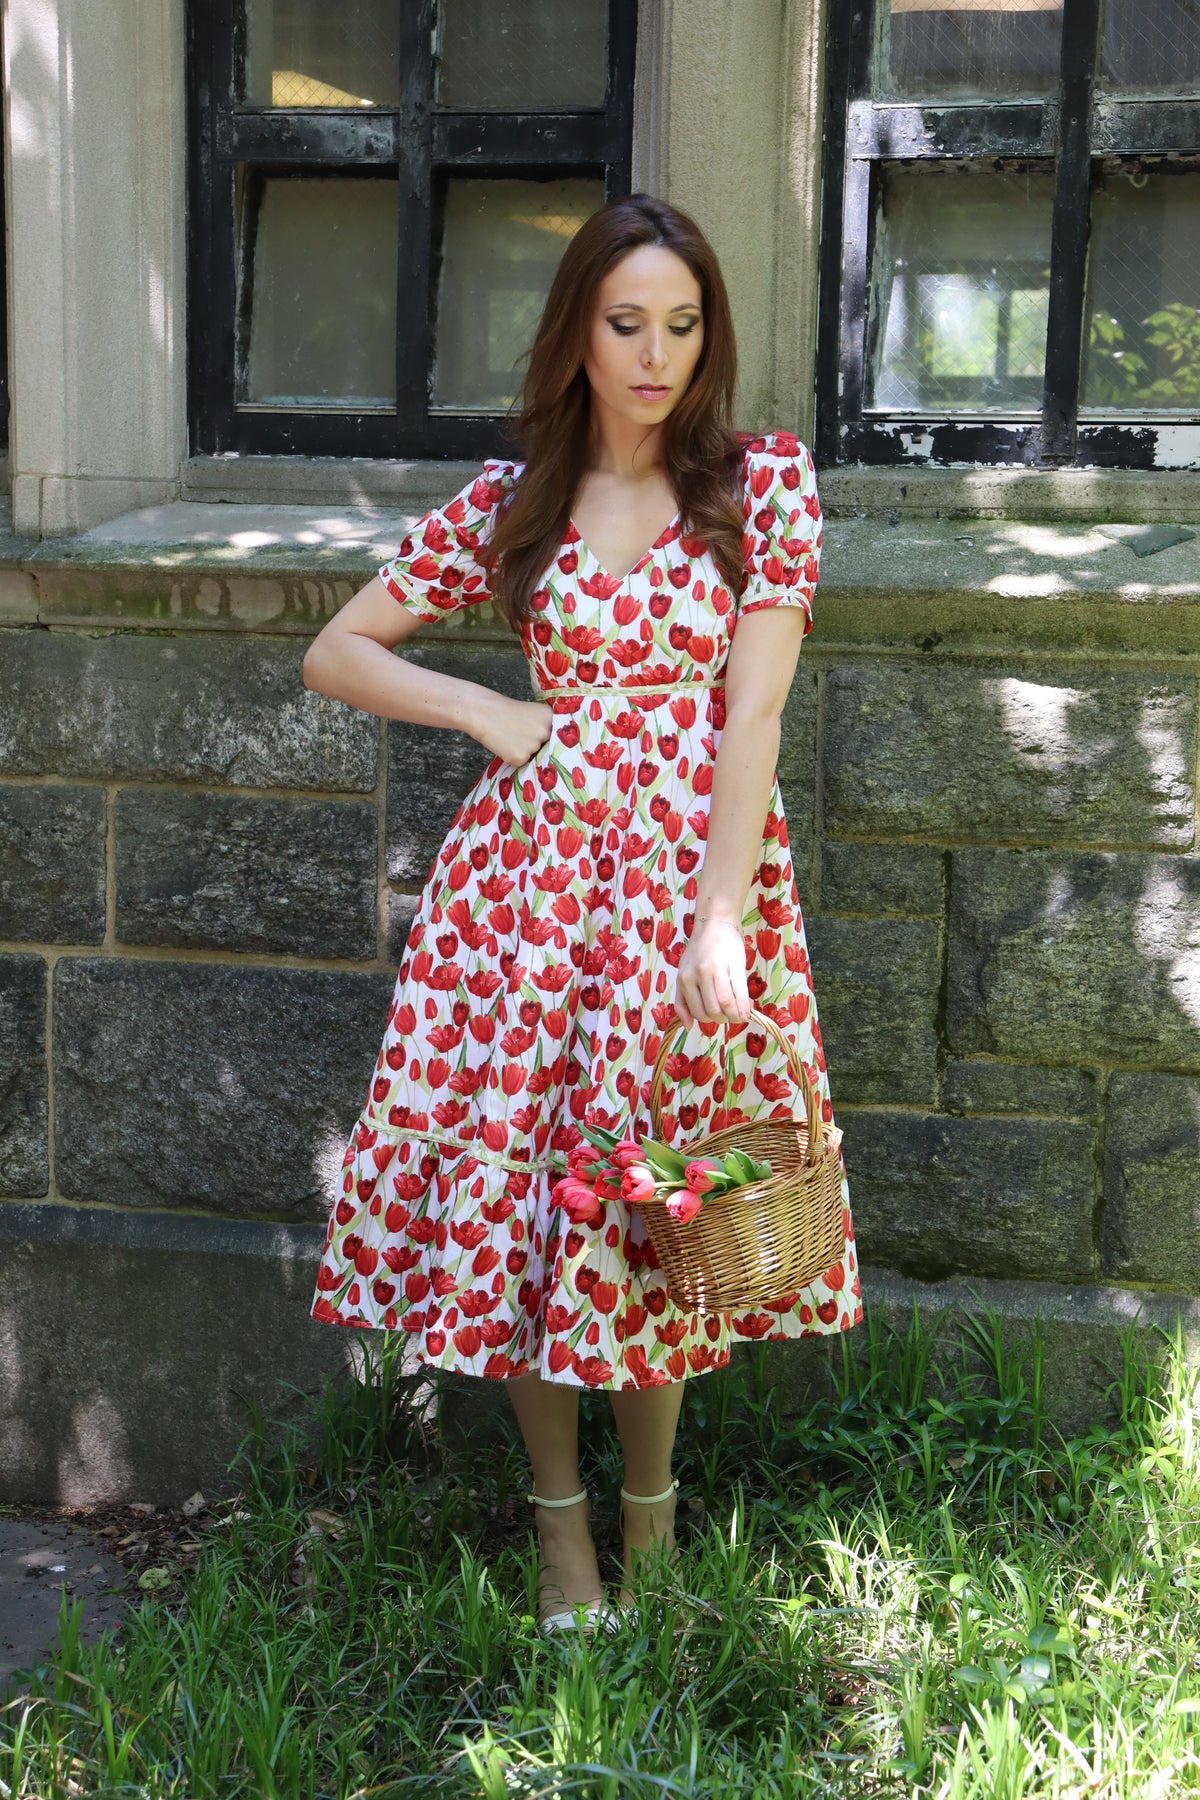 Model wearing midi length dress with a tulip print on white and holding a basket of tulips looking downward.